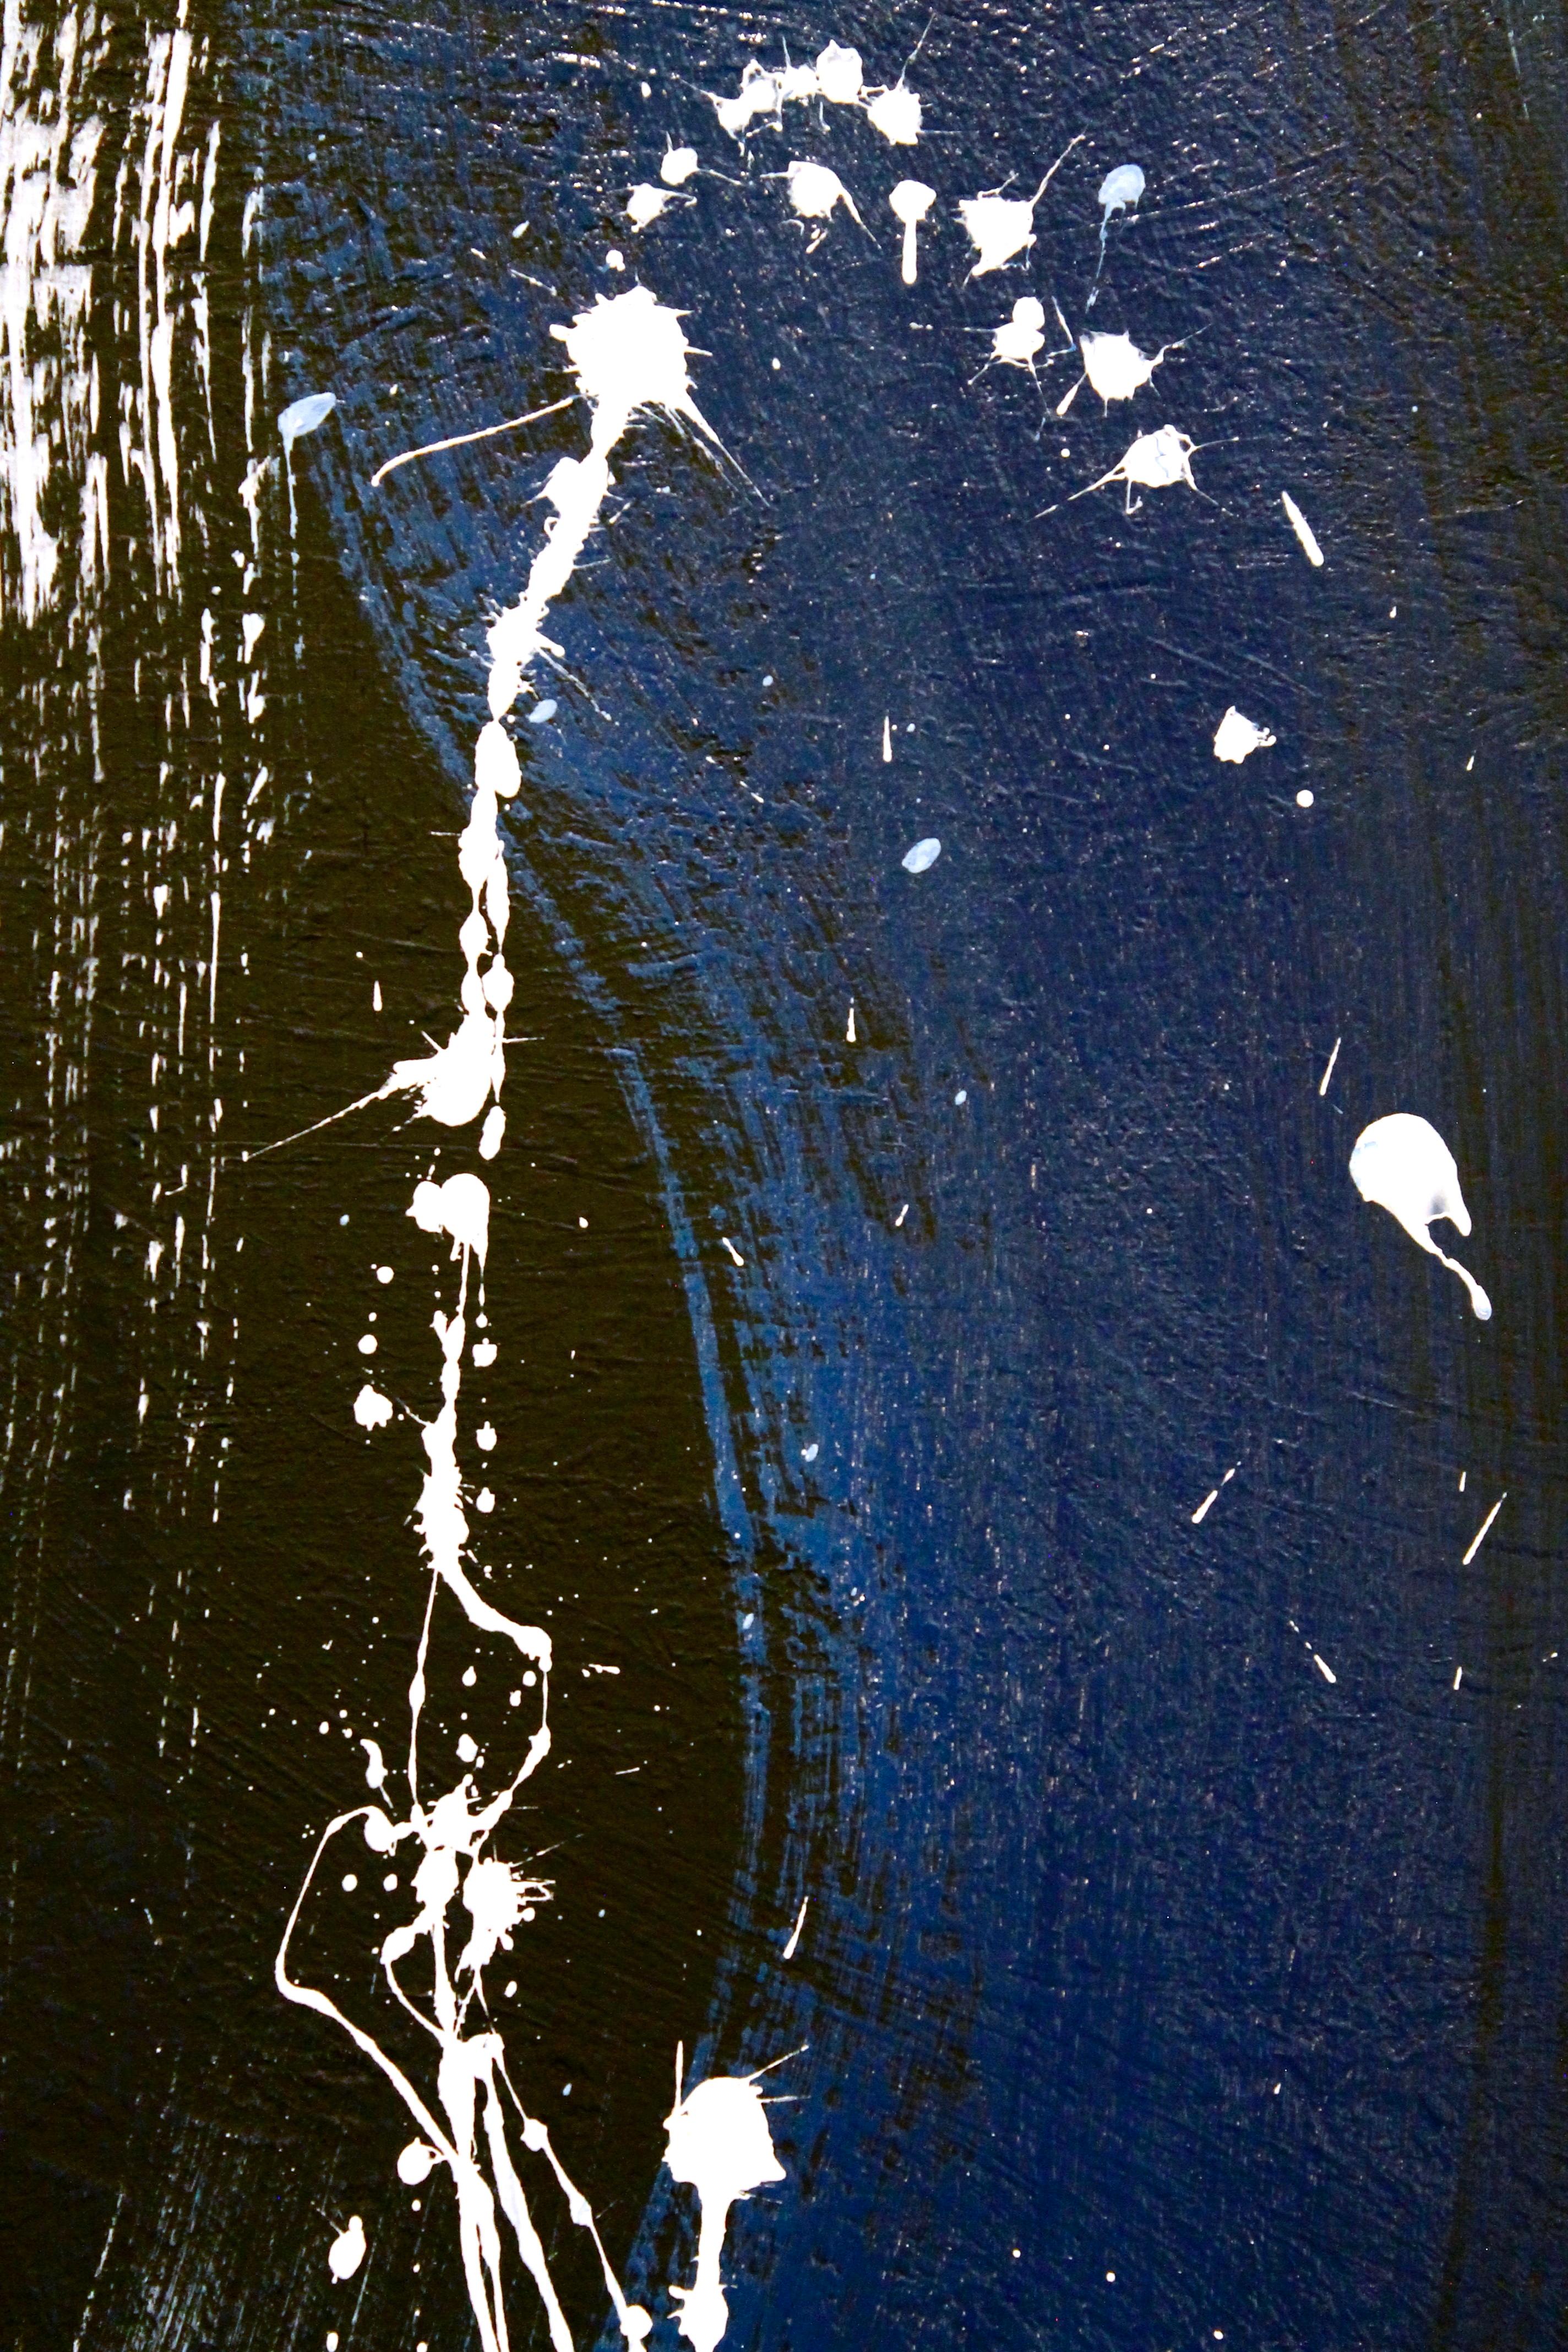 <p>Artist Comments<br>A contemporary abstract expressionist piece in black, blue, and white by artist Naoko Paluszak. Sweeping calligraphic strokes appear above the deep blue gradient. Gestural brushwork joined by drips and splashes results in a